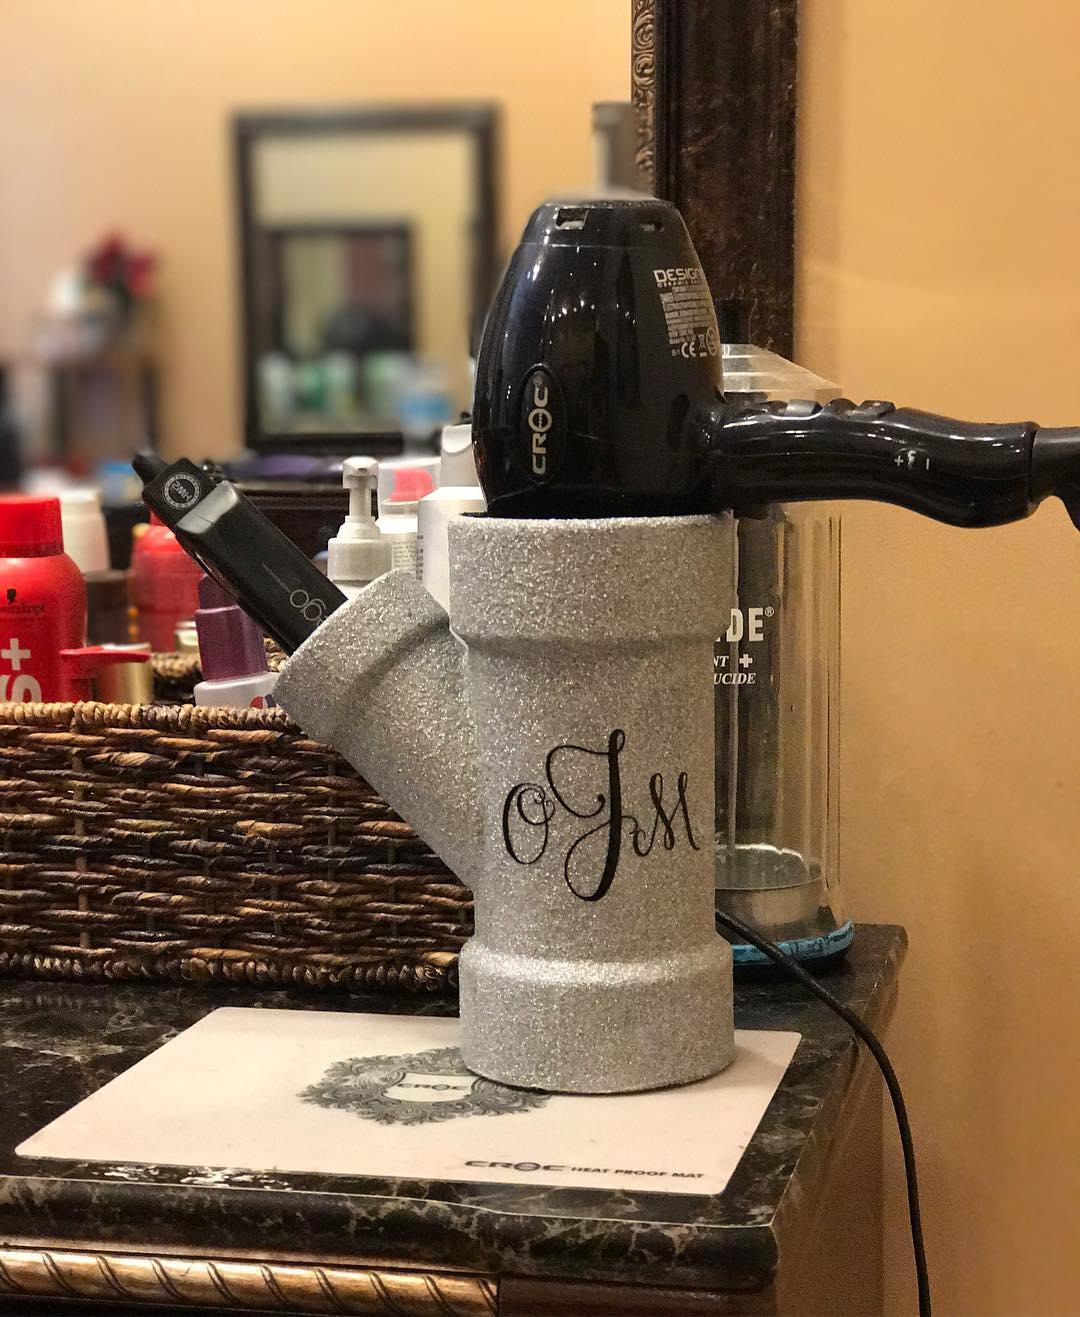 Blow Dryer Stored Safetly in Cup. Photo by Instagram user @glitteredpup_designs